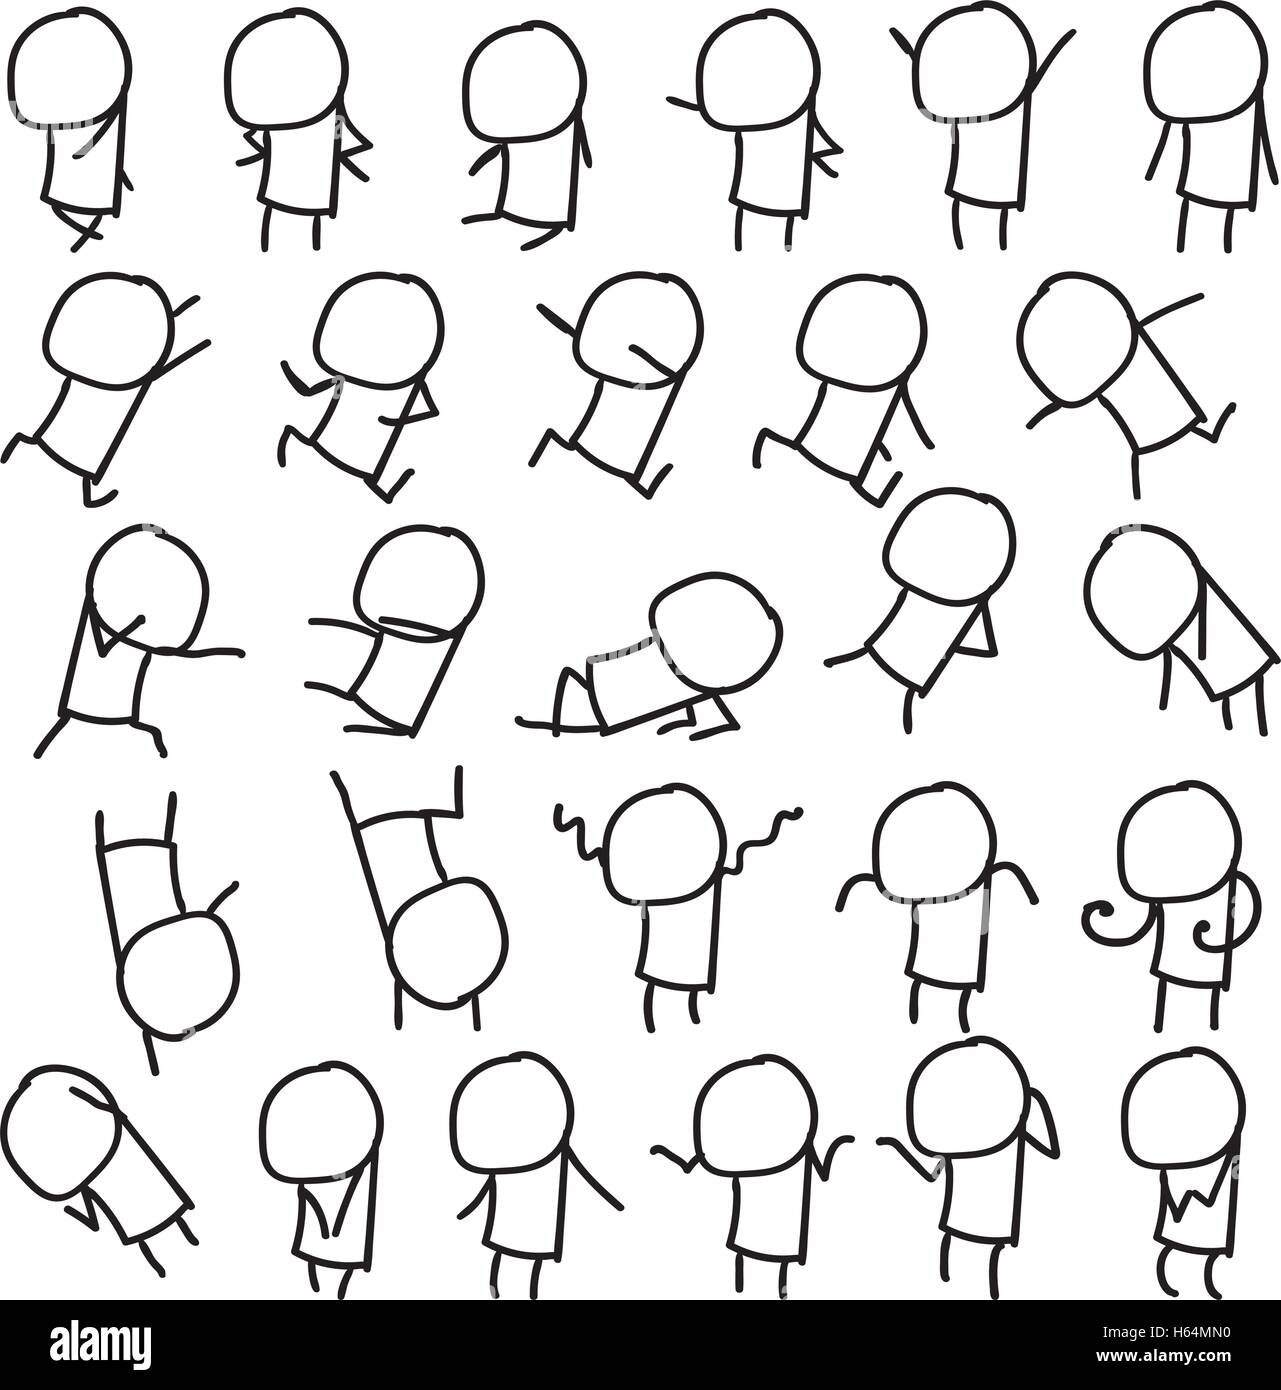 Cartoon doodle stick figure with different pose Vector Image